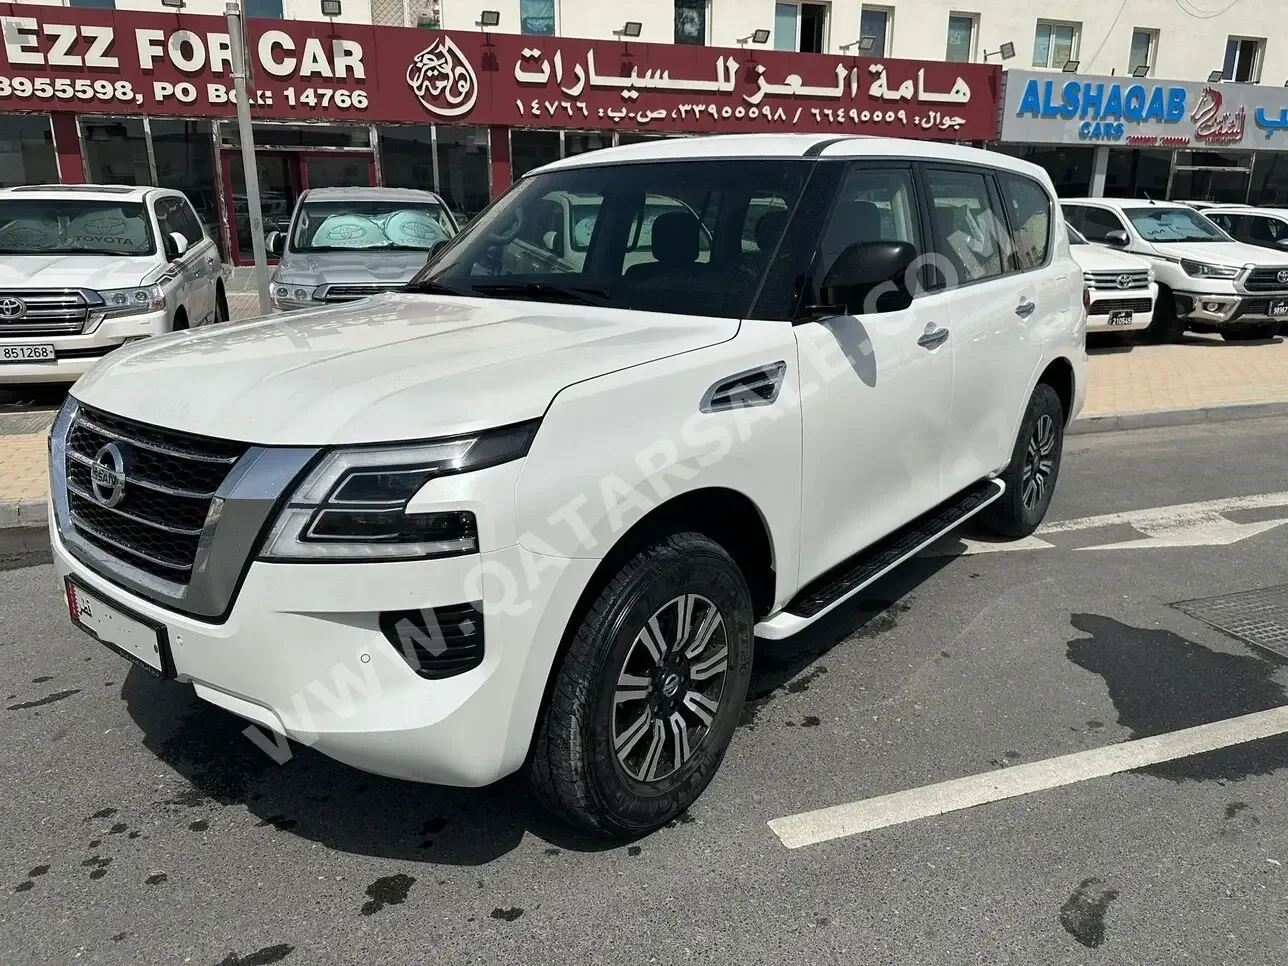 Nissan  Patrol  XE  2021  Automatic  73,000 Km  6 Cylinder  Four Wheel Drive (4WD)  SUV  White